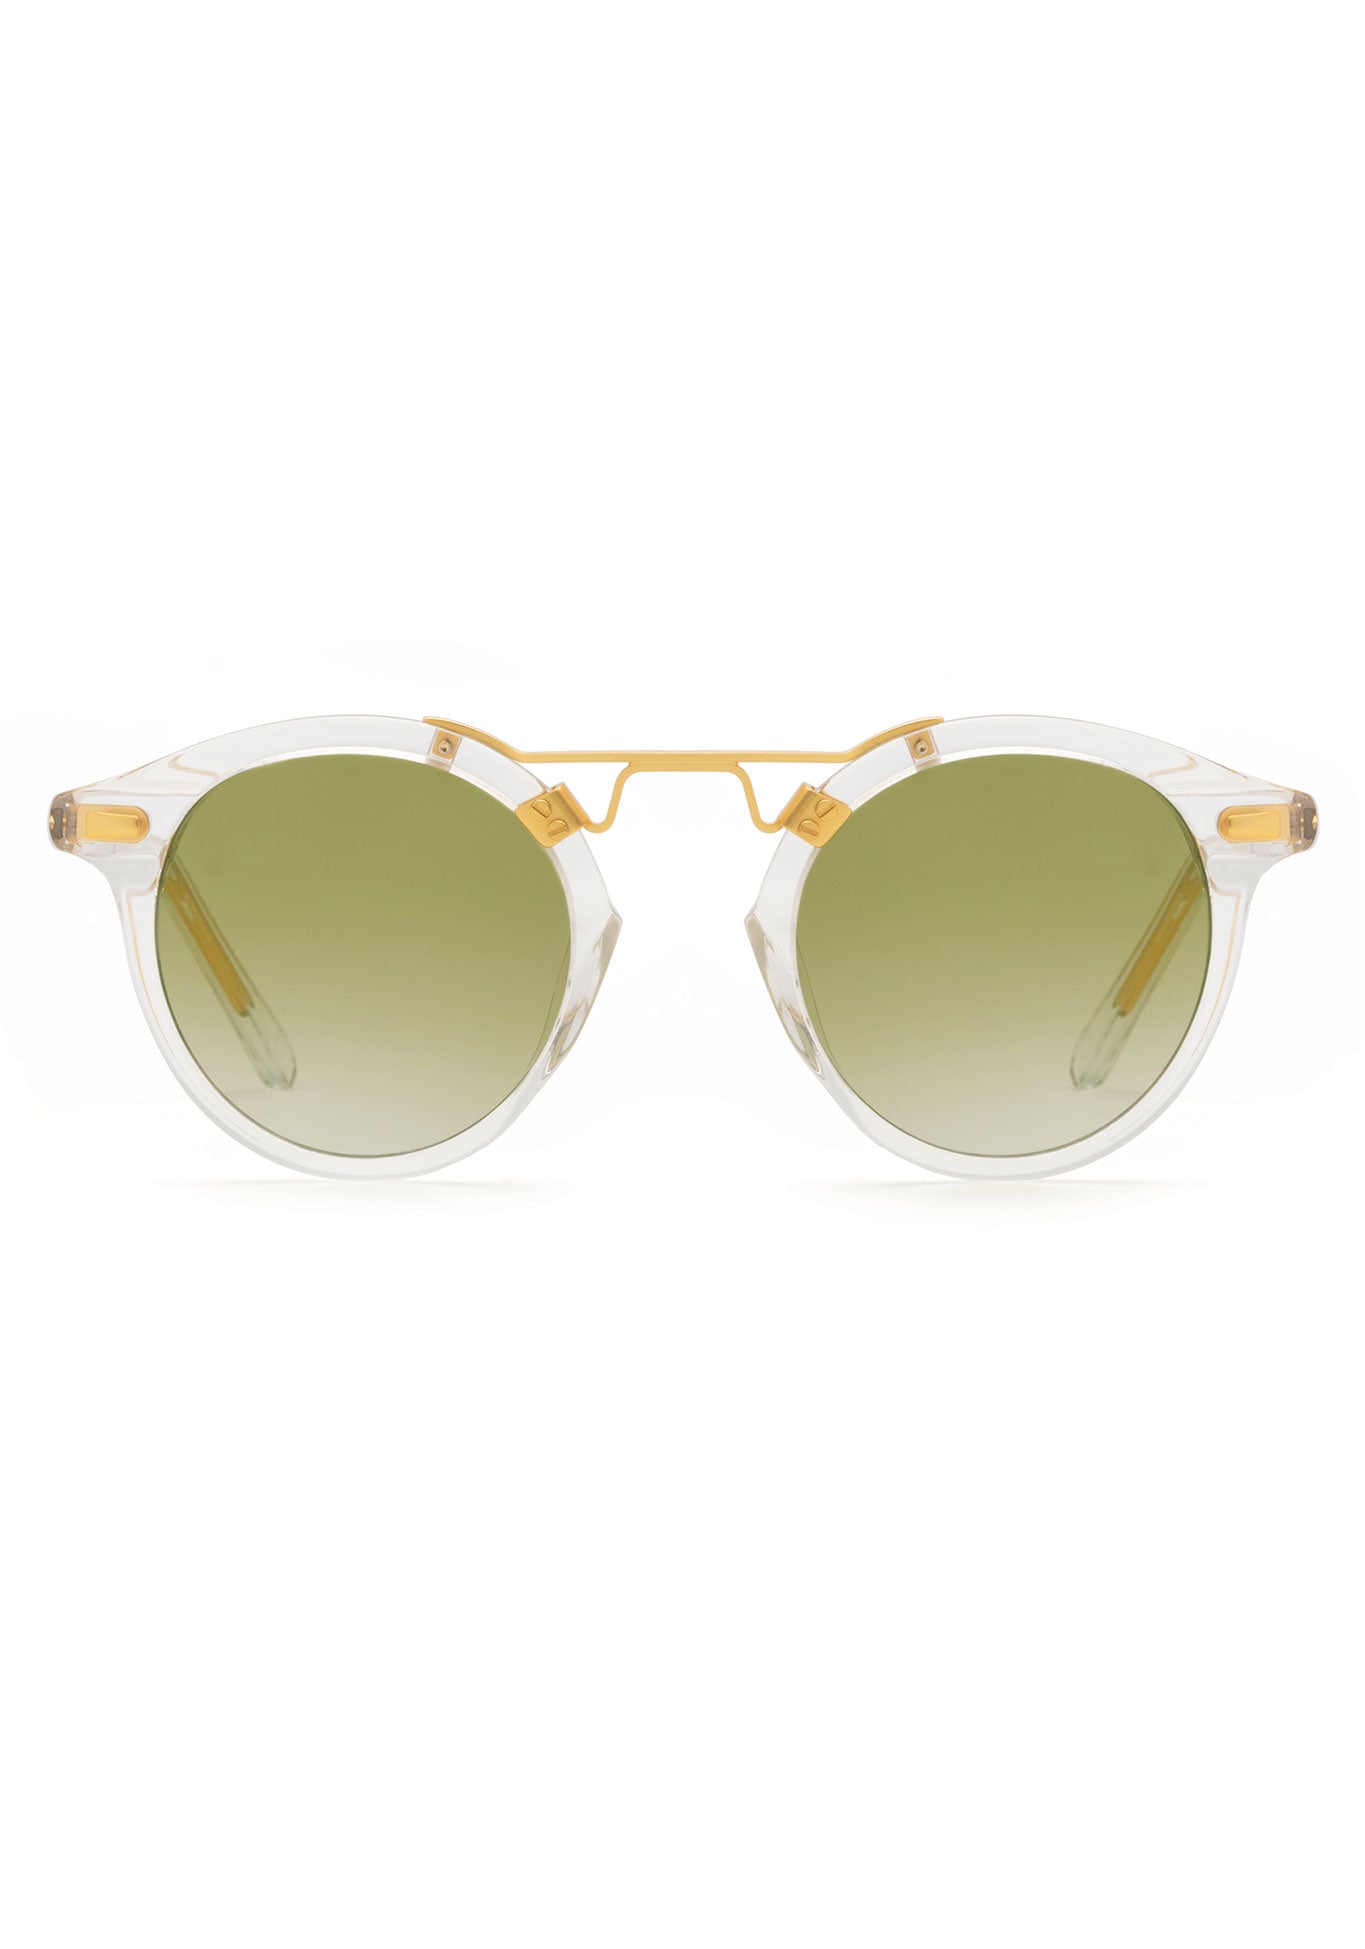 KREWE SUNGLASSES - ST. LOUIS MIRRORED | Crystal 24K + Custom Vanity Tint handcrafted, luxury round clear sunglasses with a double metal bridge and green tinted lenses